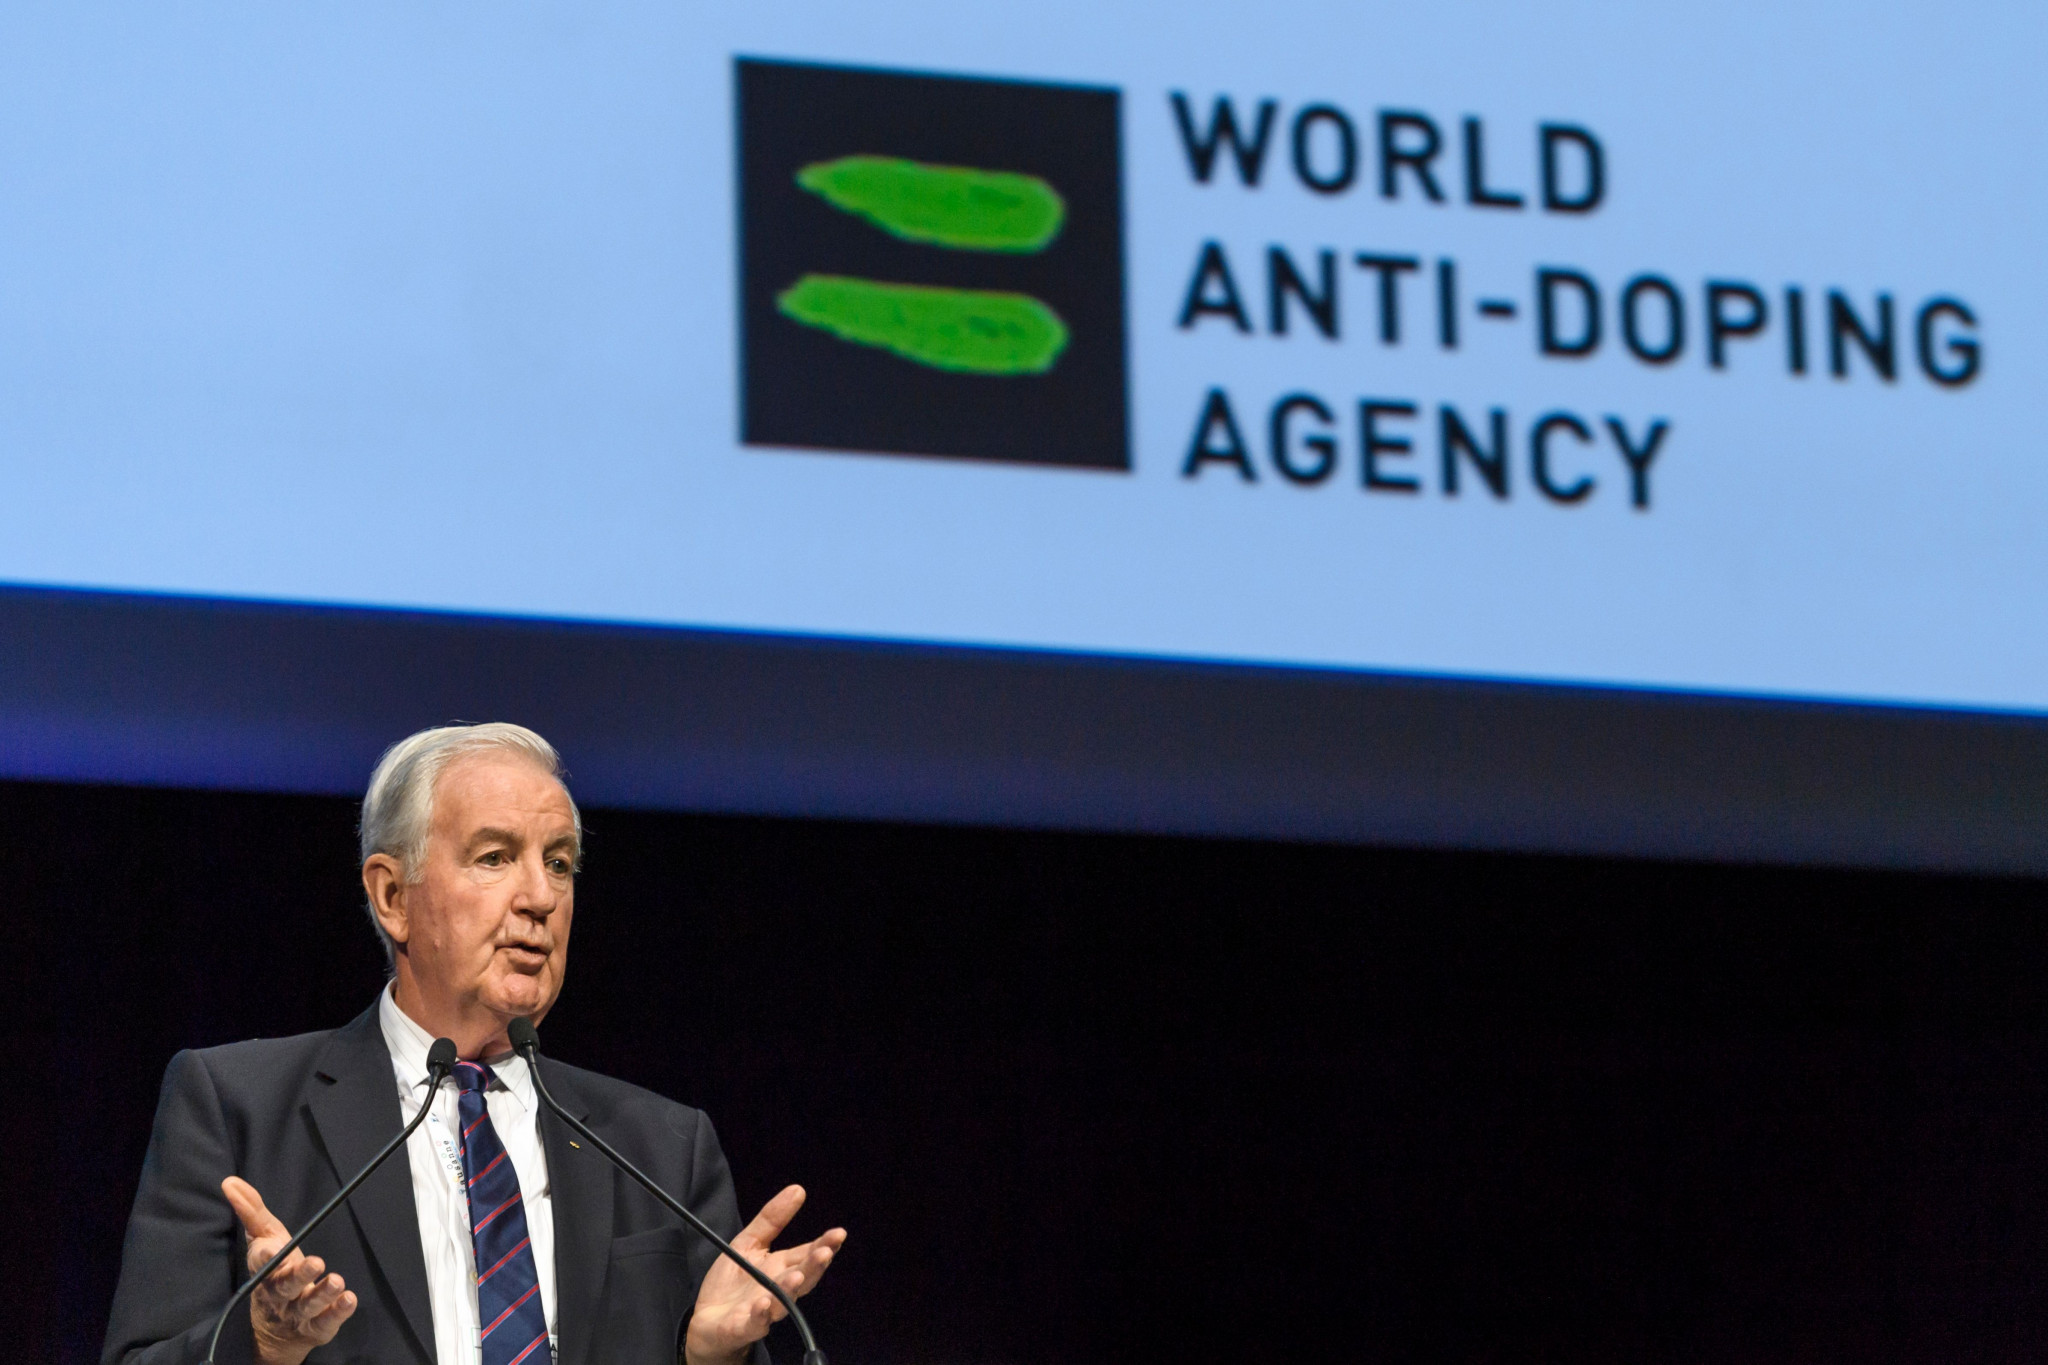 The World Anti-Doping Agency could declare RUSADA non-compliant again if evidence of tampering is proven ©Getty Images